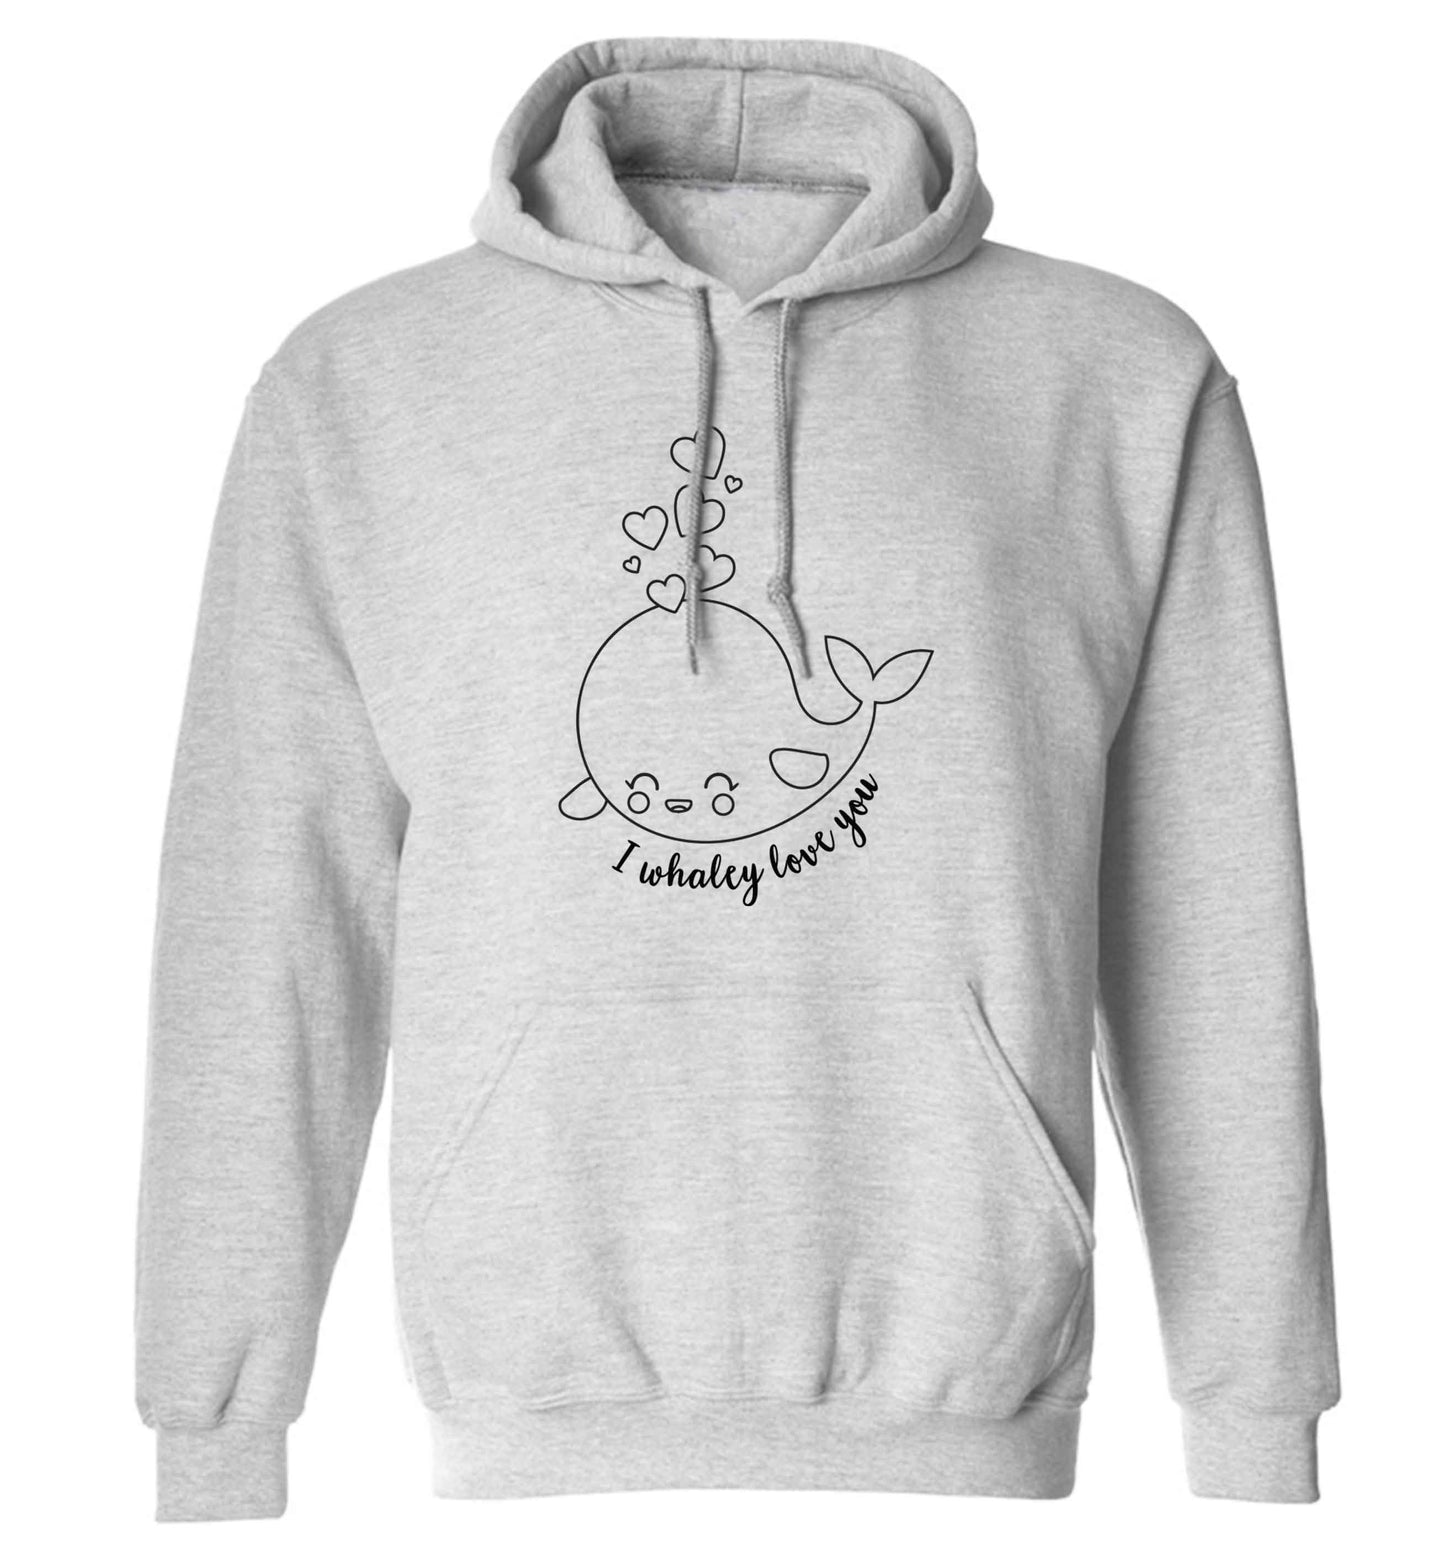 I whaley love you adults unisex grey hoodie 2XL